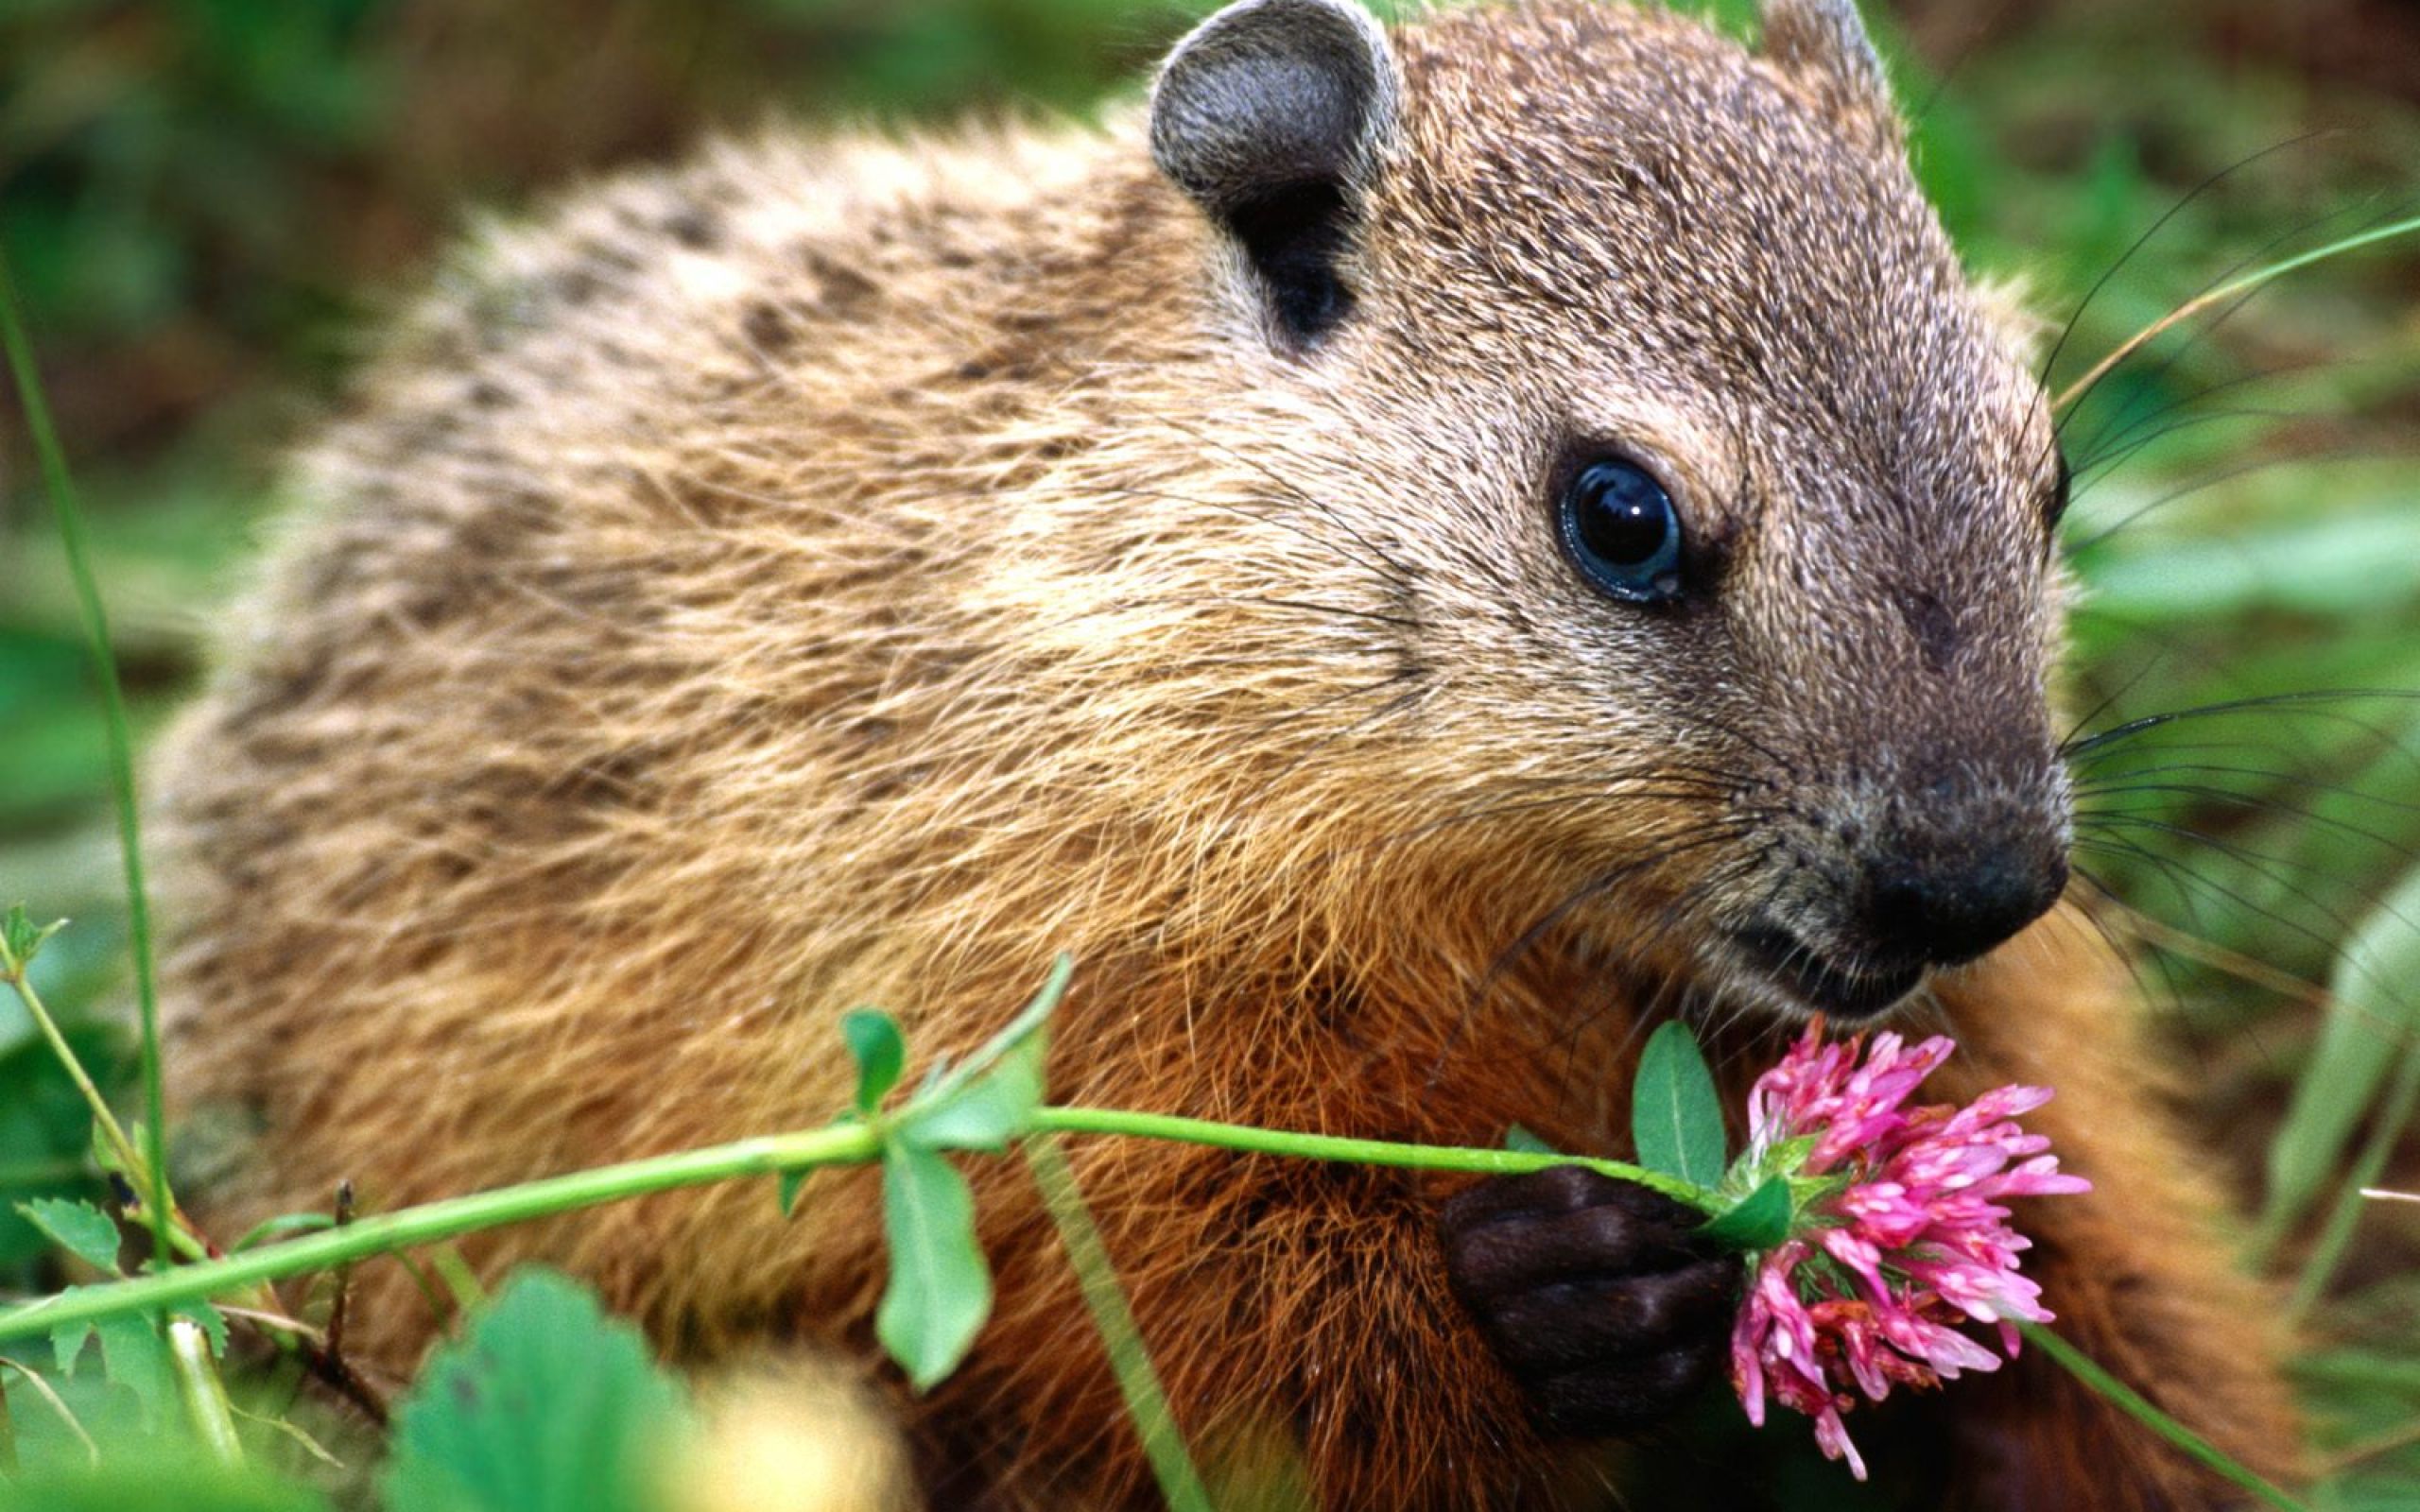 Woodchuck Smelling Flower and Birds Wallpaper. All is Wall